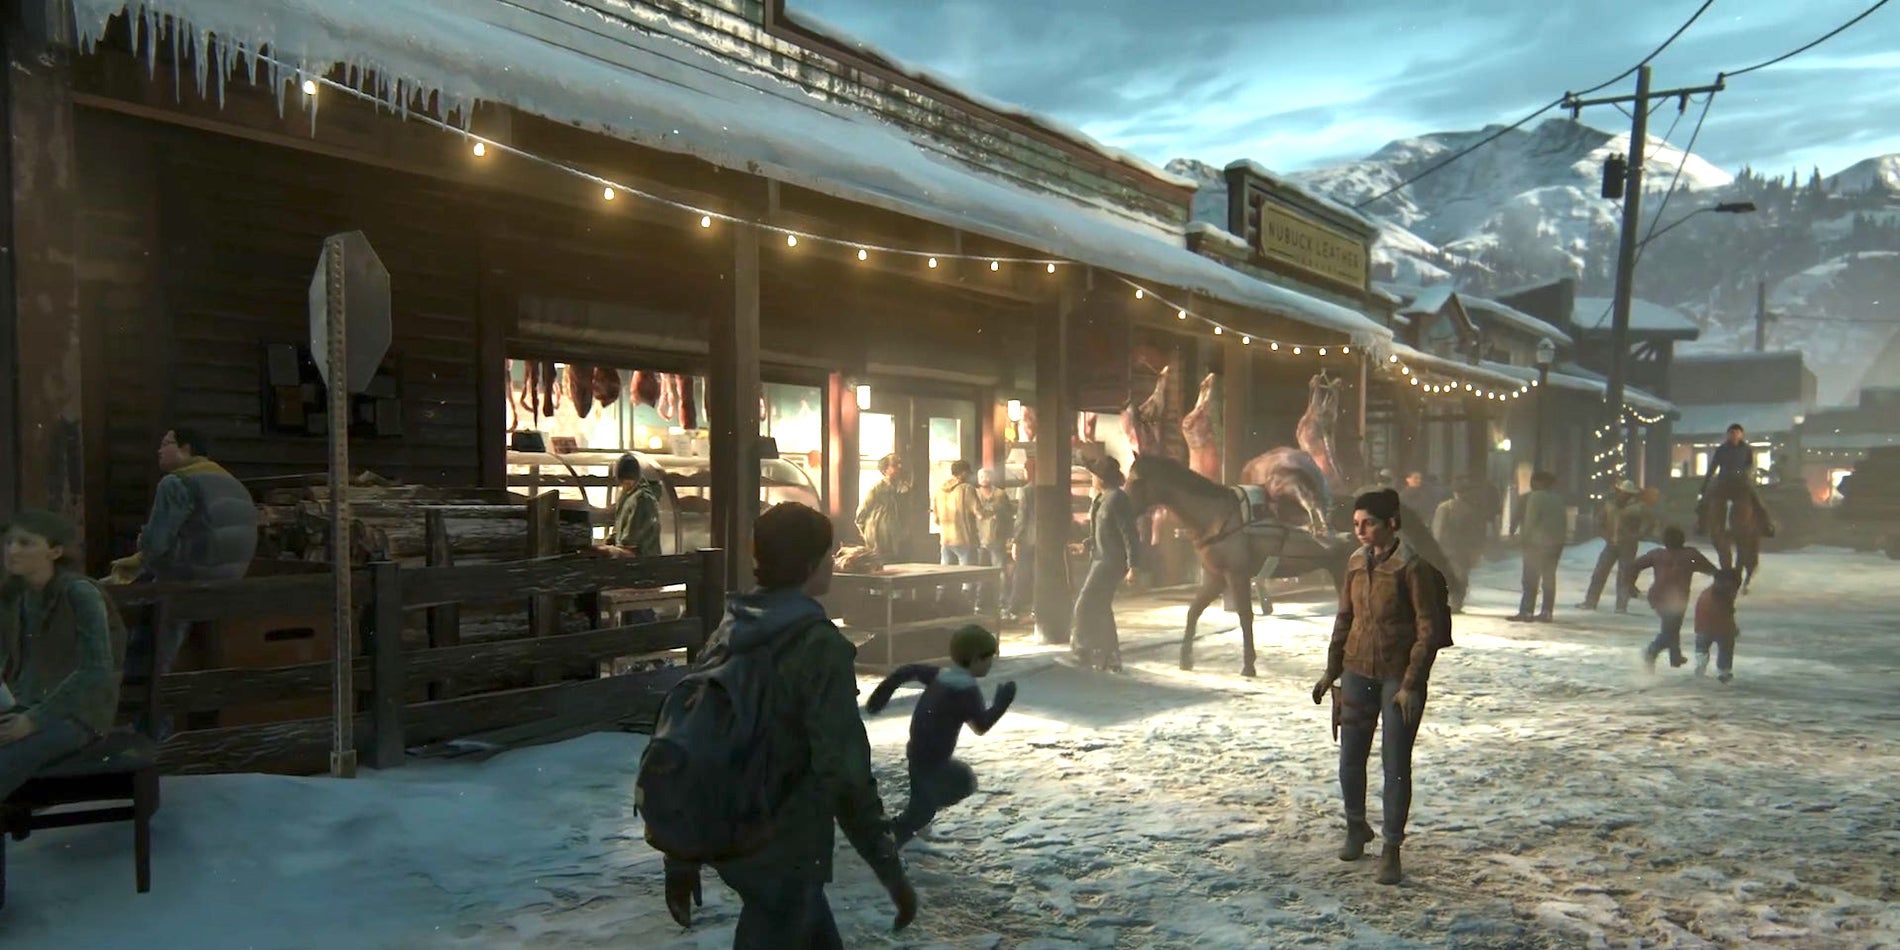 how-hbo-s-last-of-us-show-will-transform-real-town-for-game-location